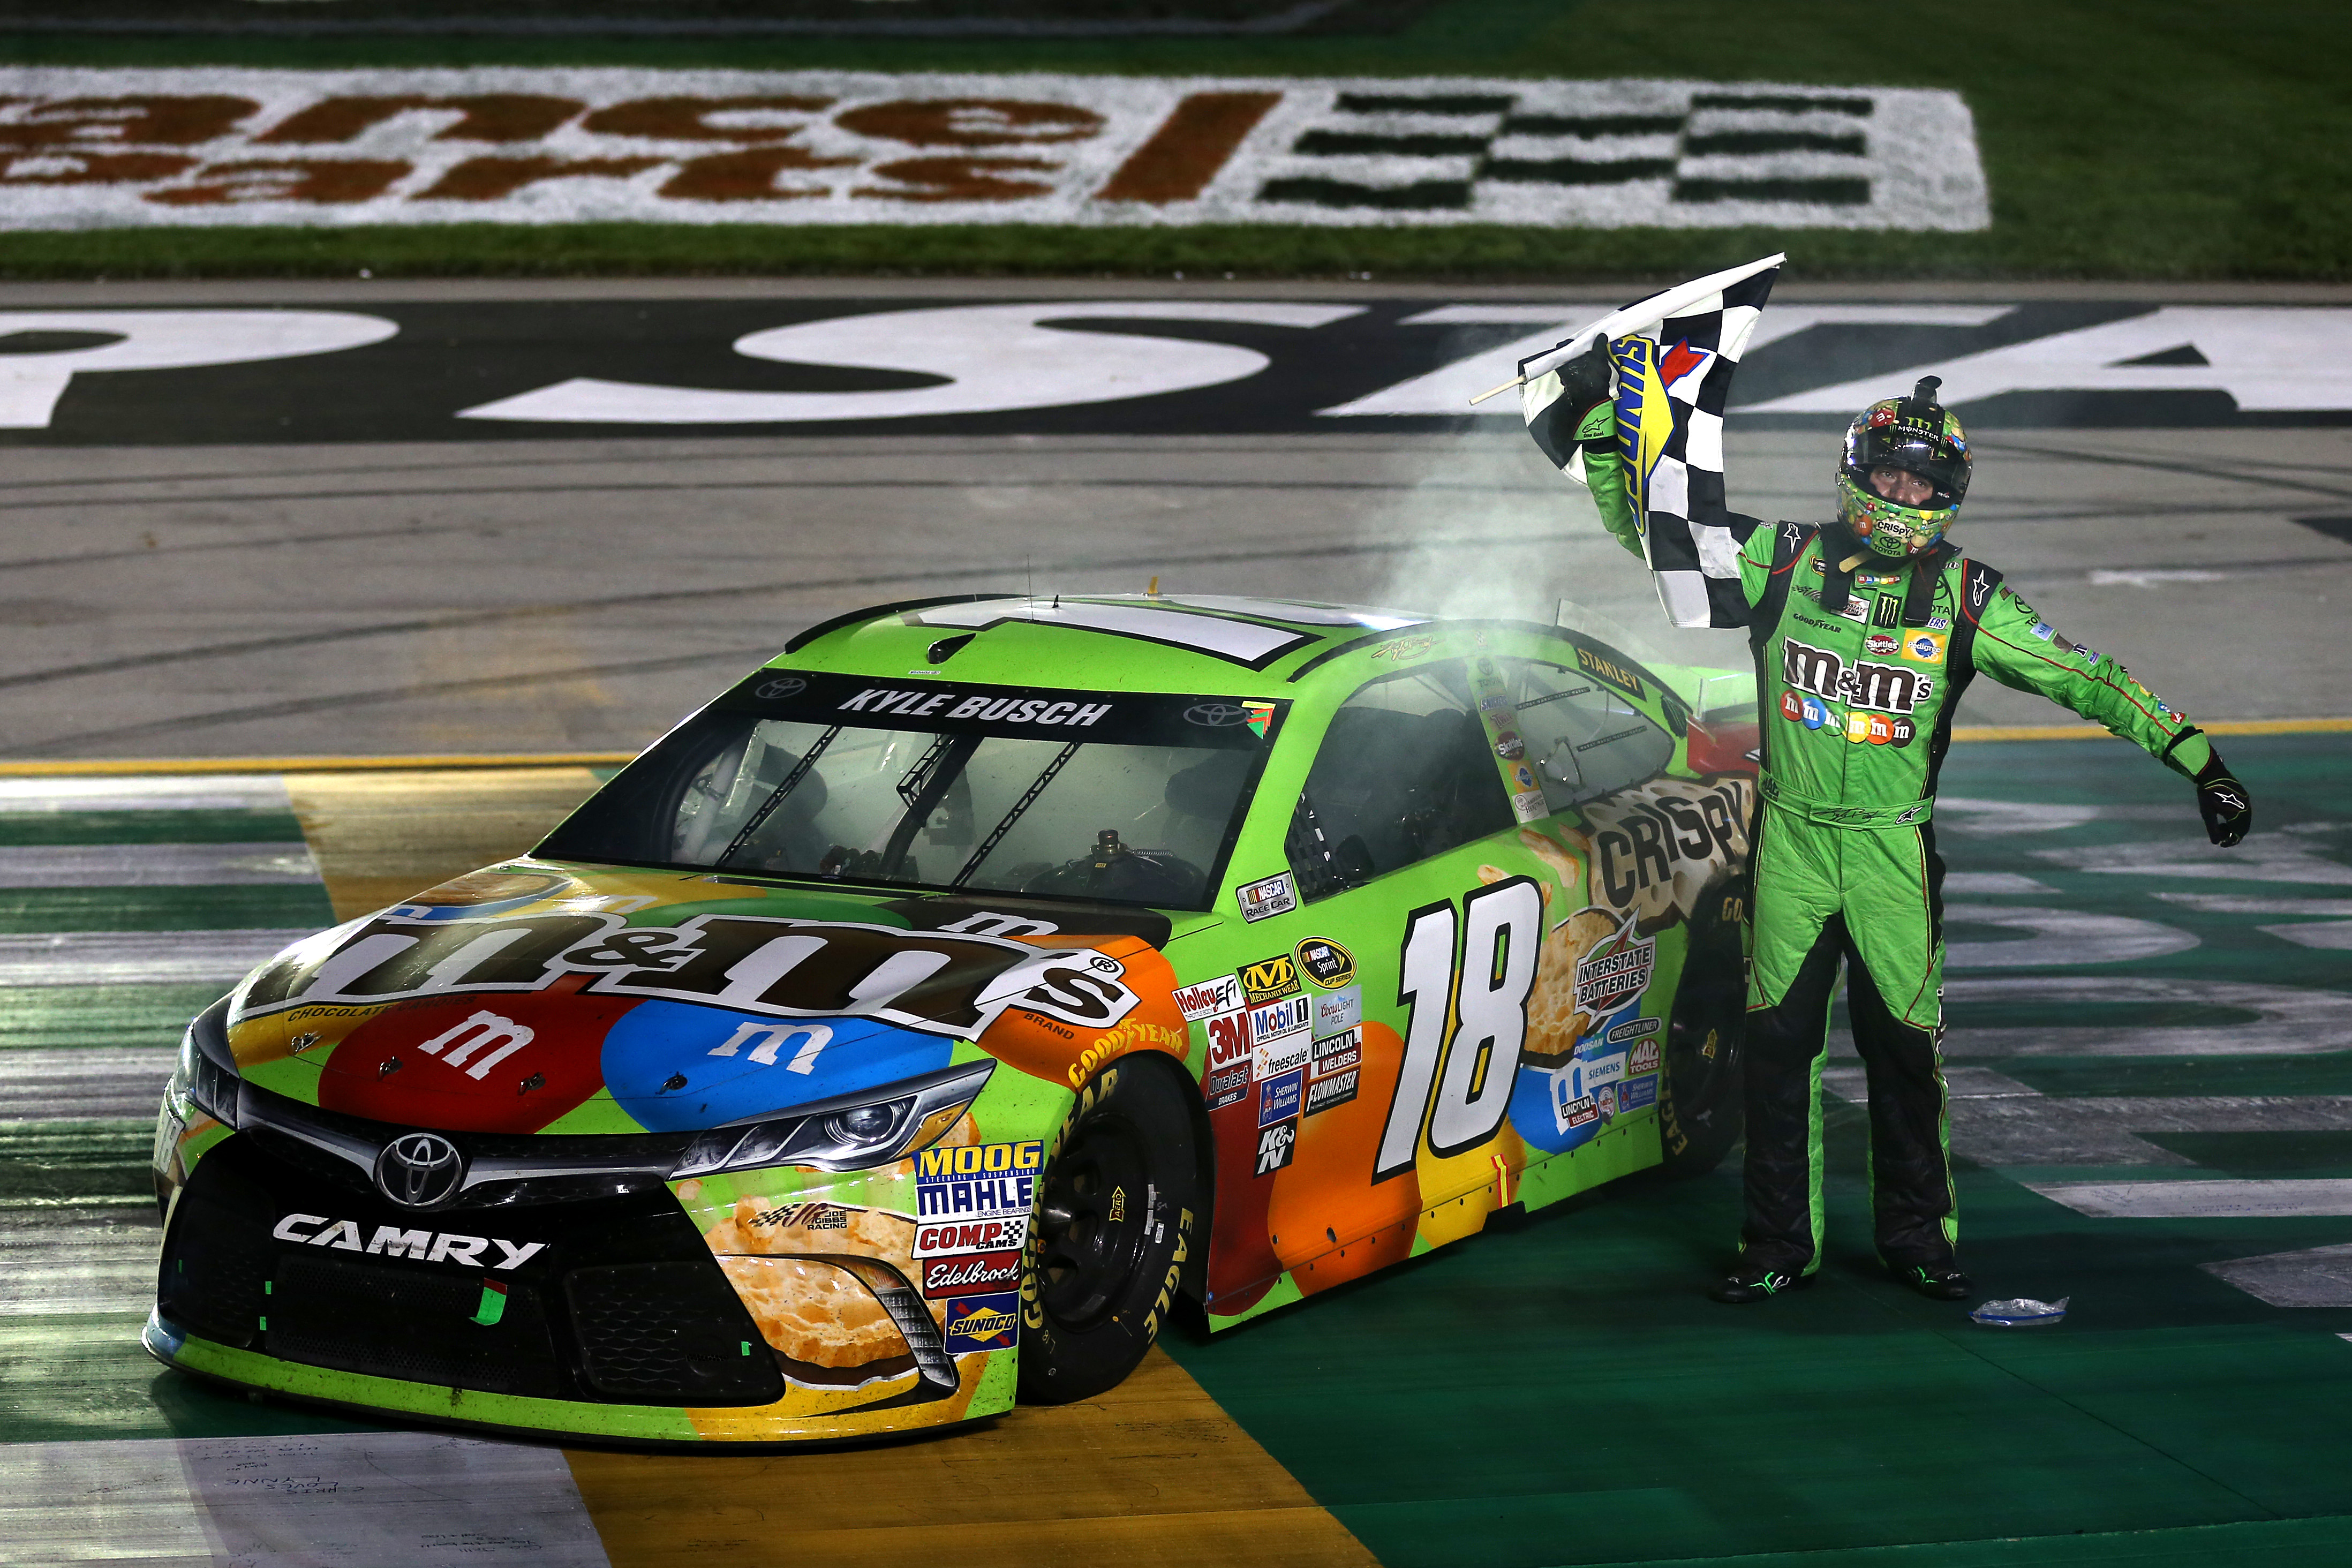 Kyle Busch - This is the only action the M&M's Crispy Camry has